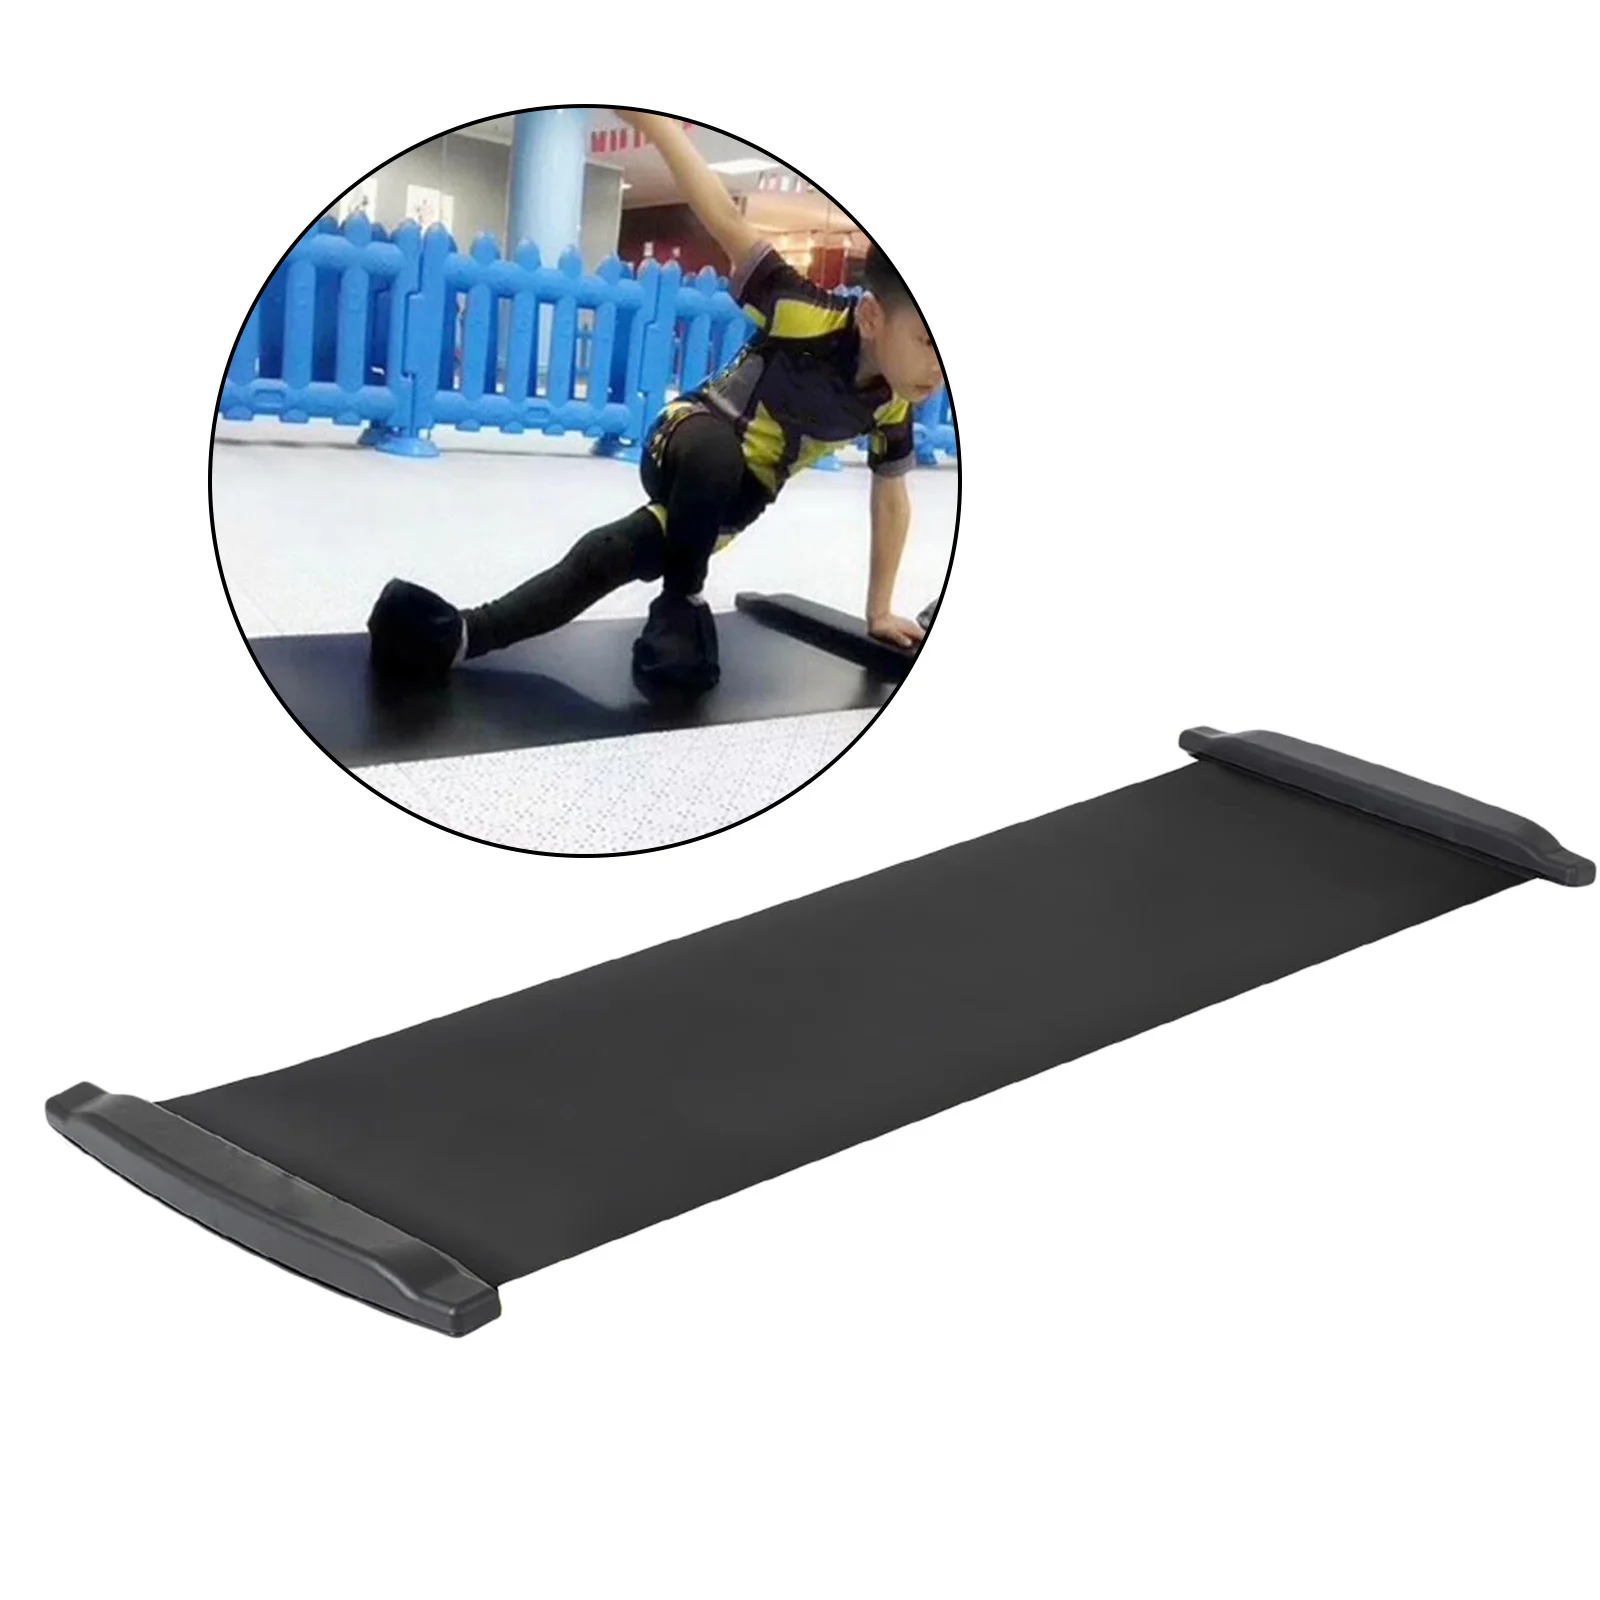 https://ae01.alicdn.com/kf/H749753b58c0c48e68d151bc4b97a4044T/Slide-Board-with-Stop-Ends-180x50cm-Hockey-Skating-Training-Sliding-Mat-with.jpg